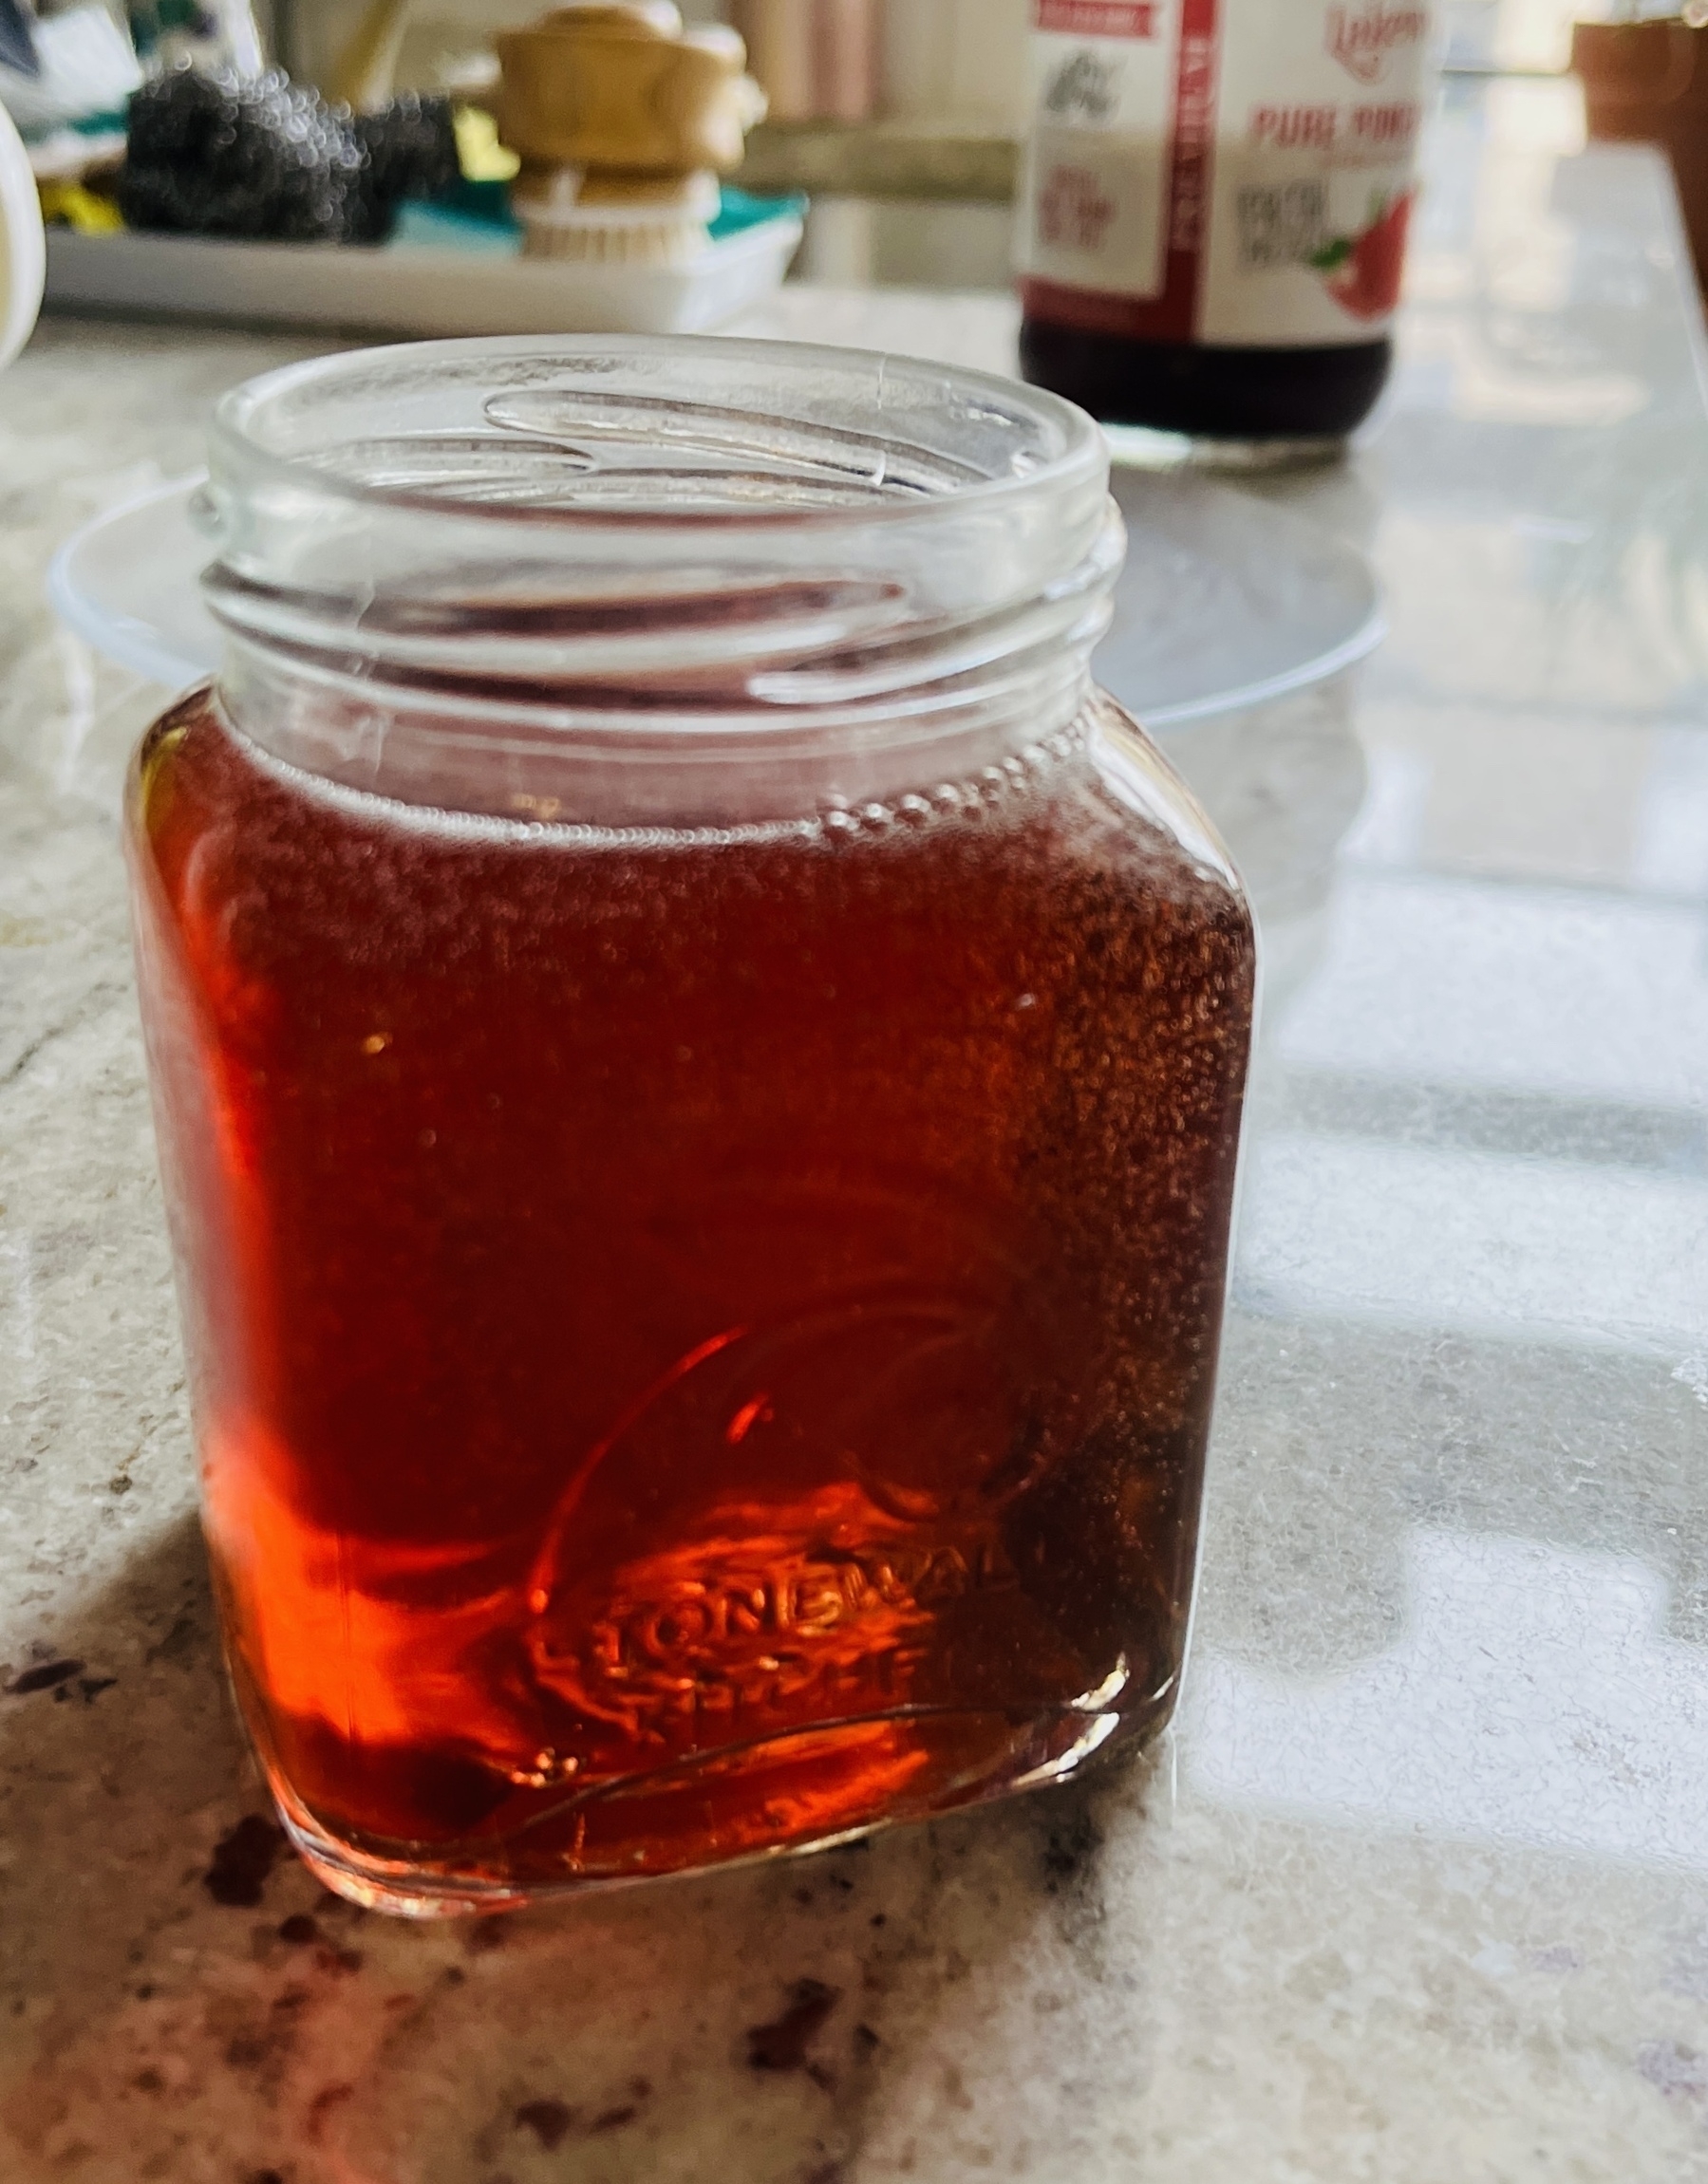 In a jar, red liquid. It is pomegranate juice with a few bubbles from carbonation in it.